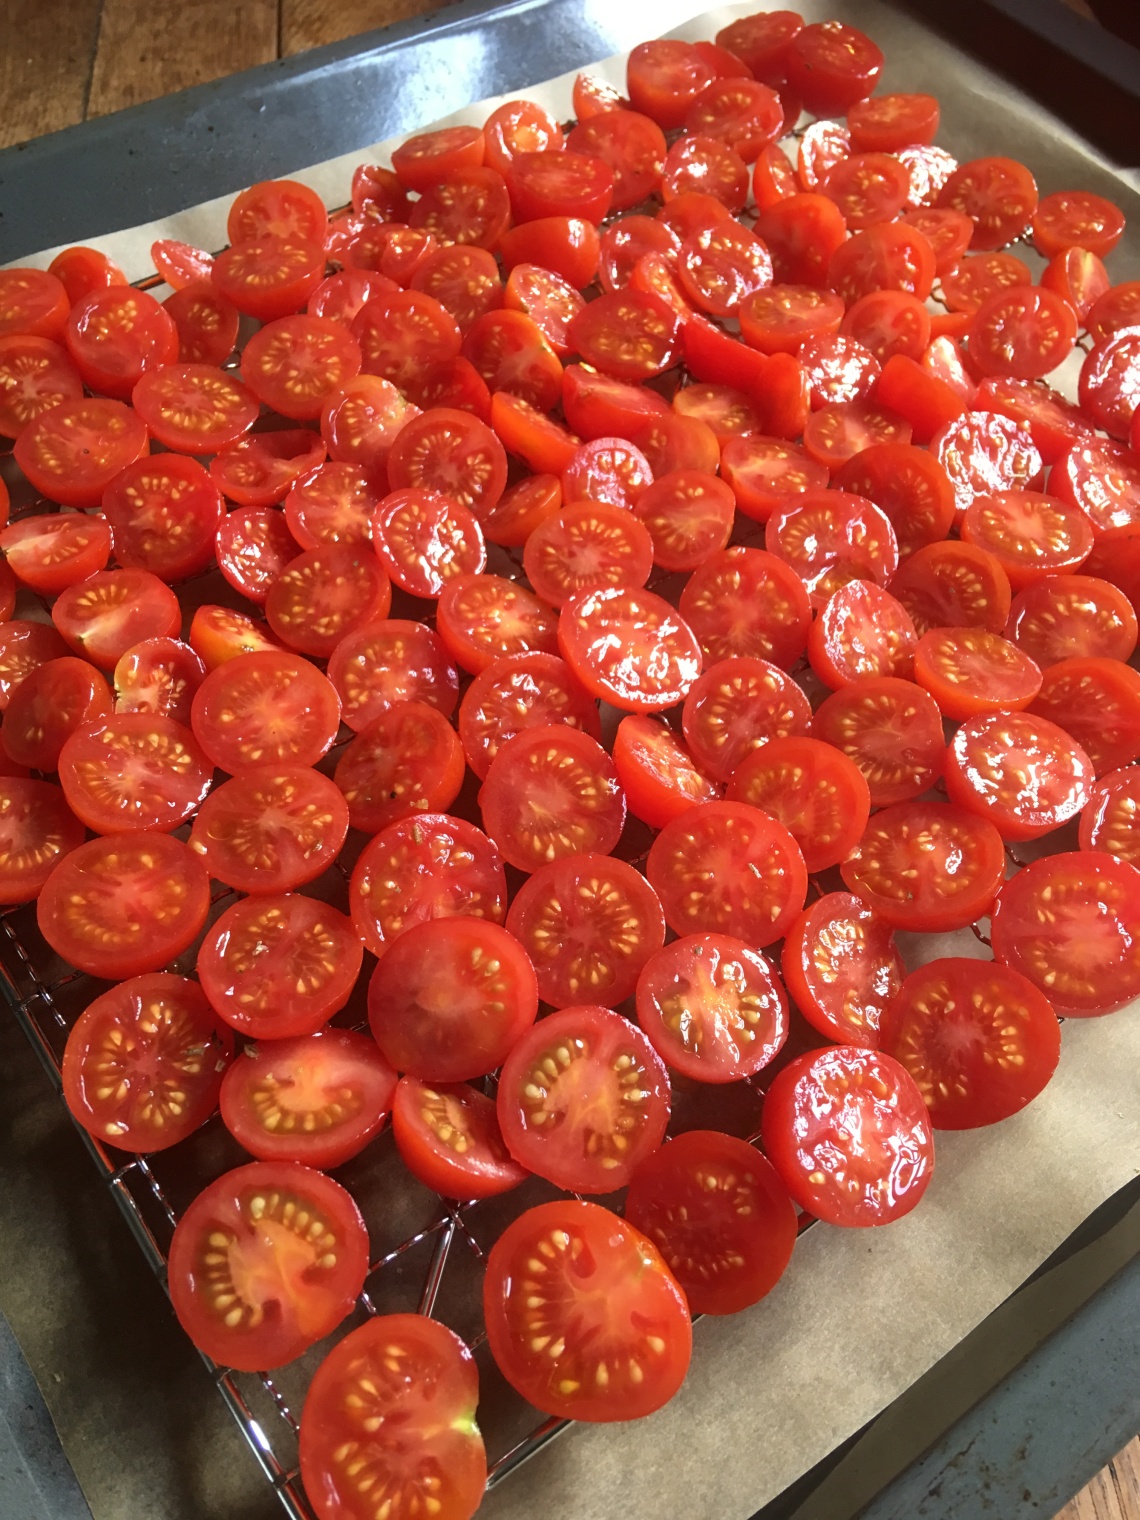 Tomatoes before